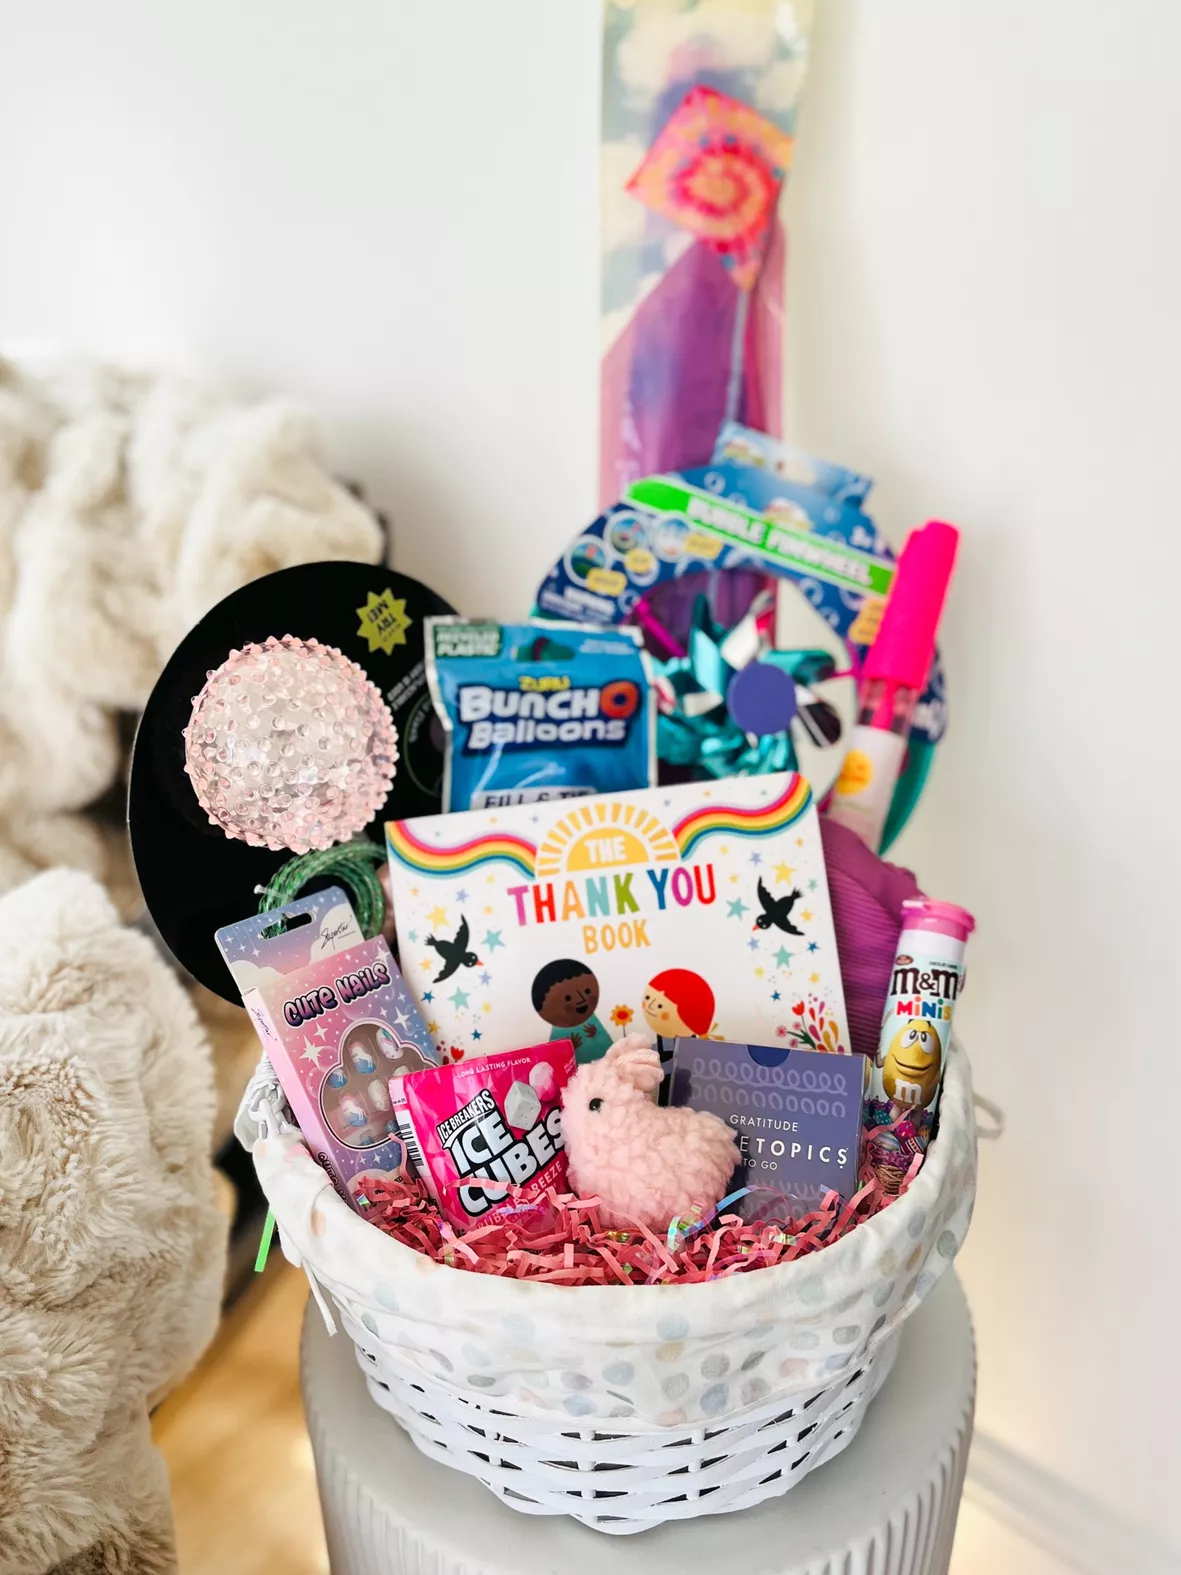 Last-Minute Easter Basket Gift Ideas, All Under $20